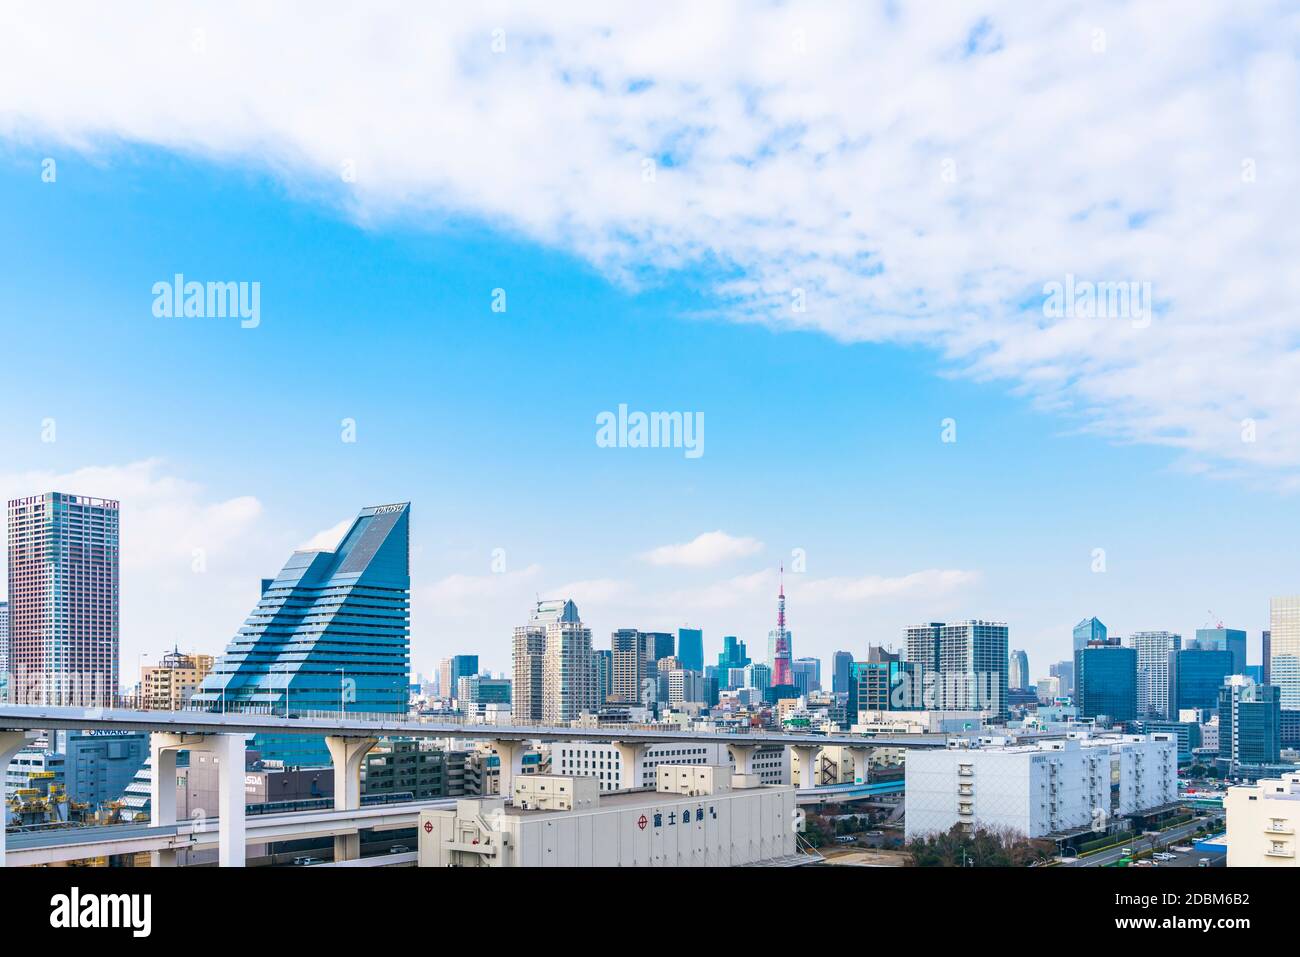 Row of high-rise building stands along the Tokyo Bay Stock Photo